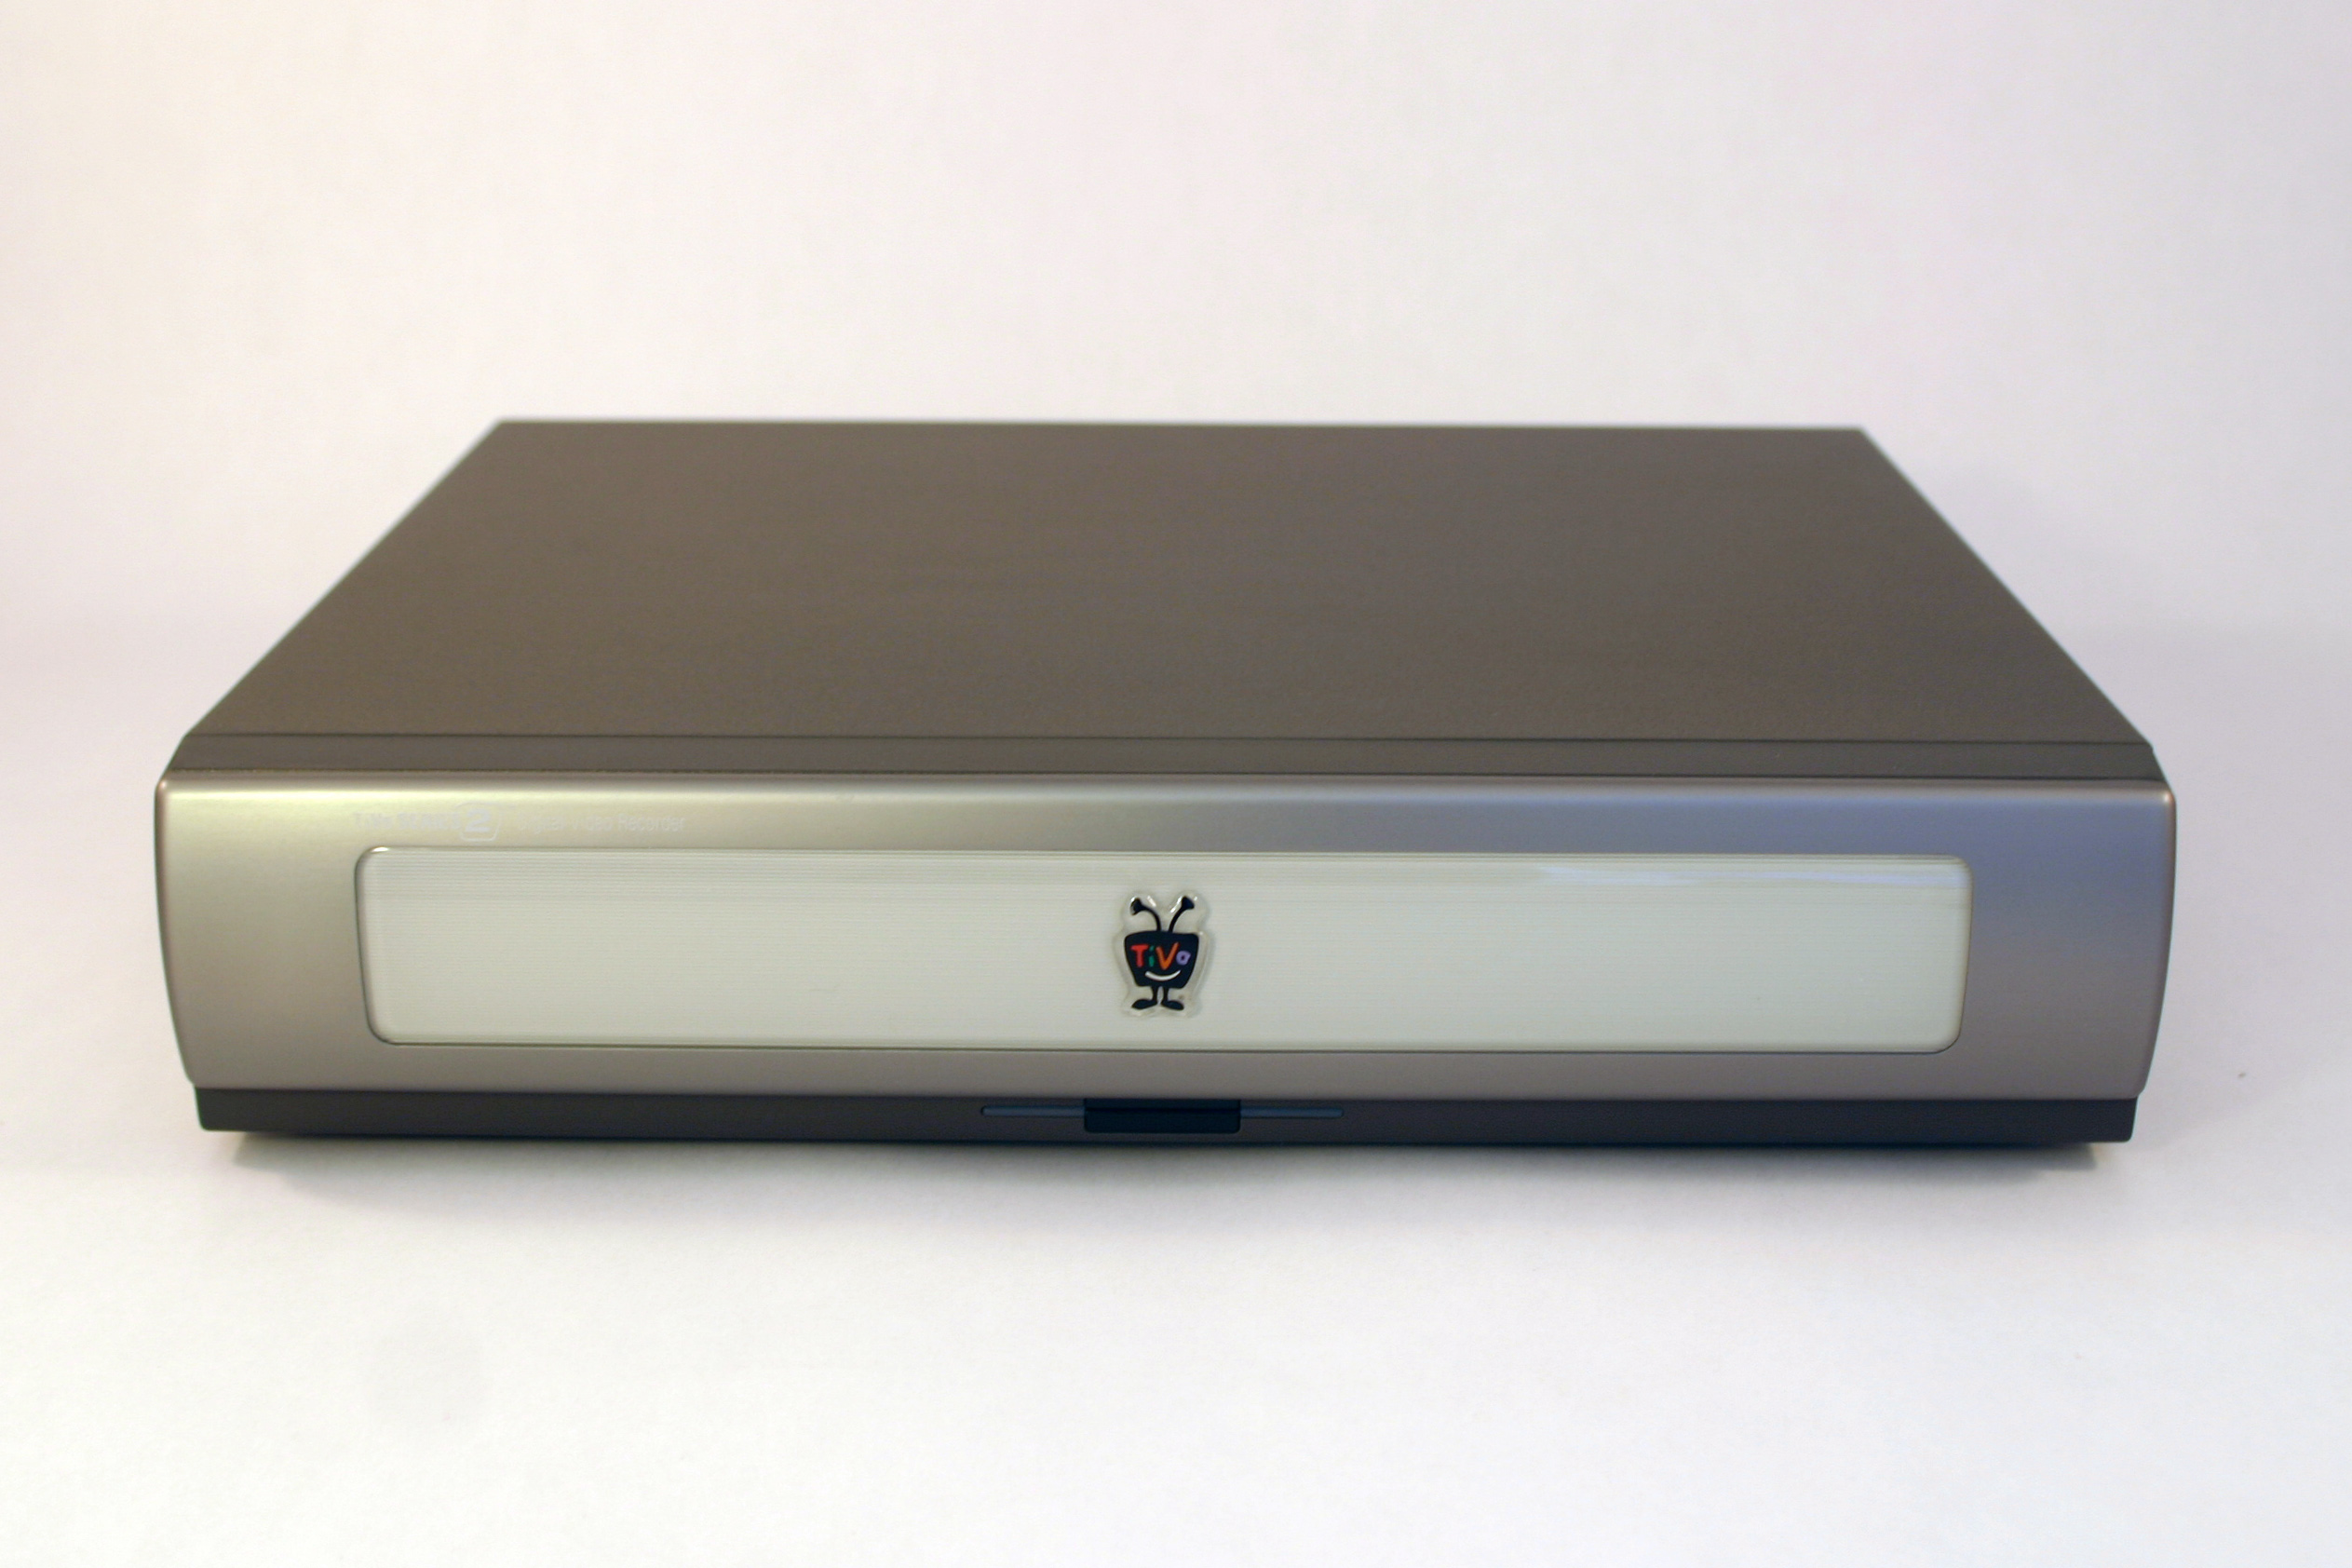 Front view of a Series 2 Tivo unit